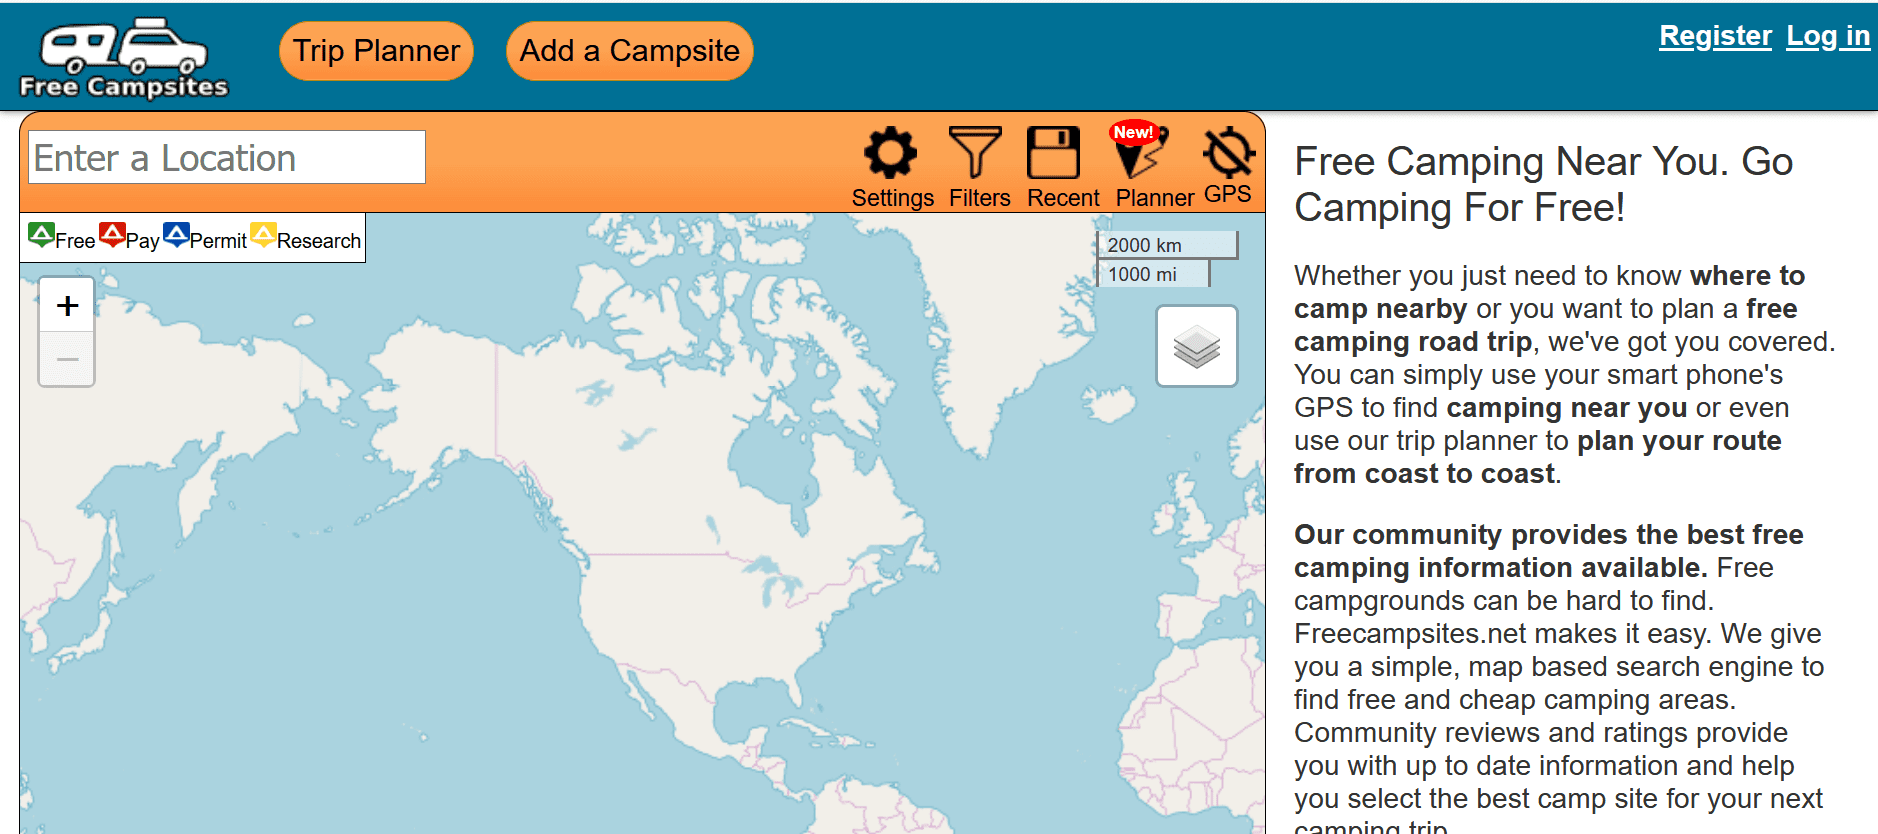 Freecampsites.net is a free camping and road trip planning app